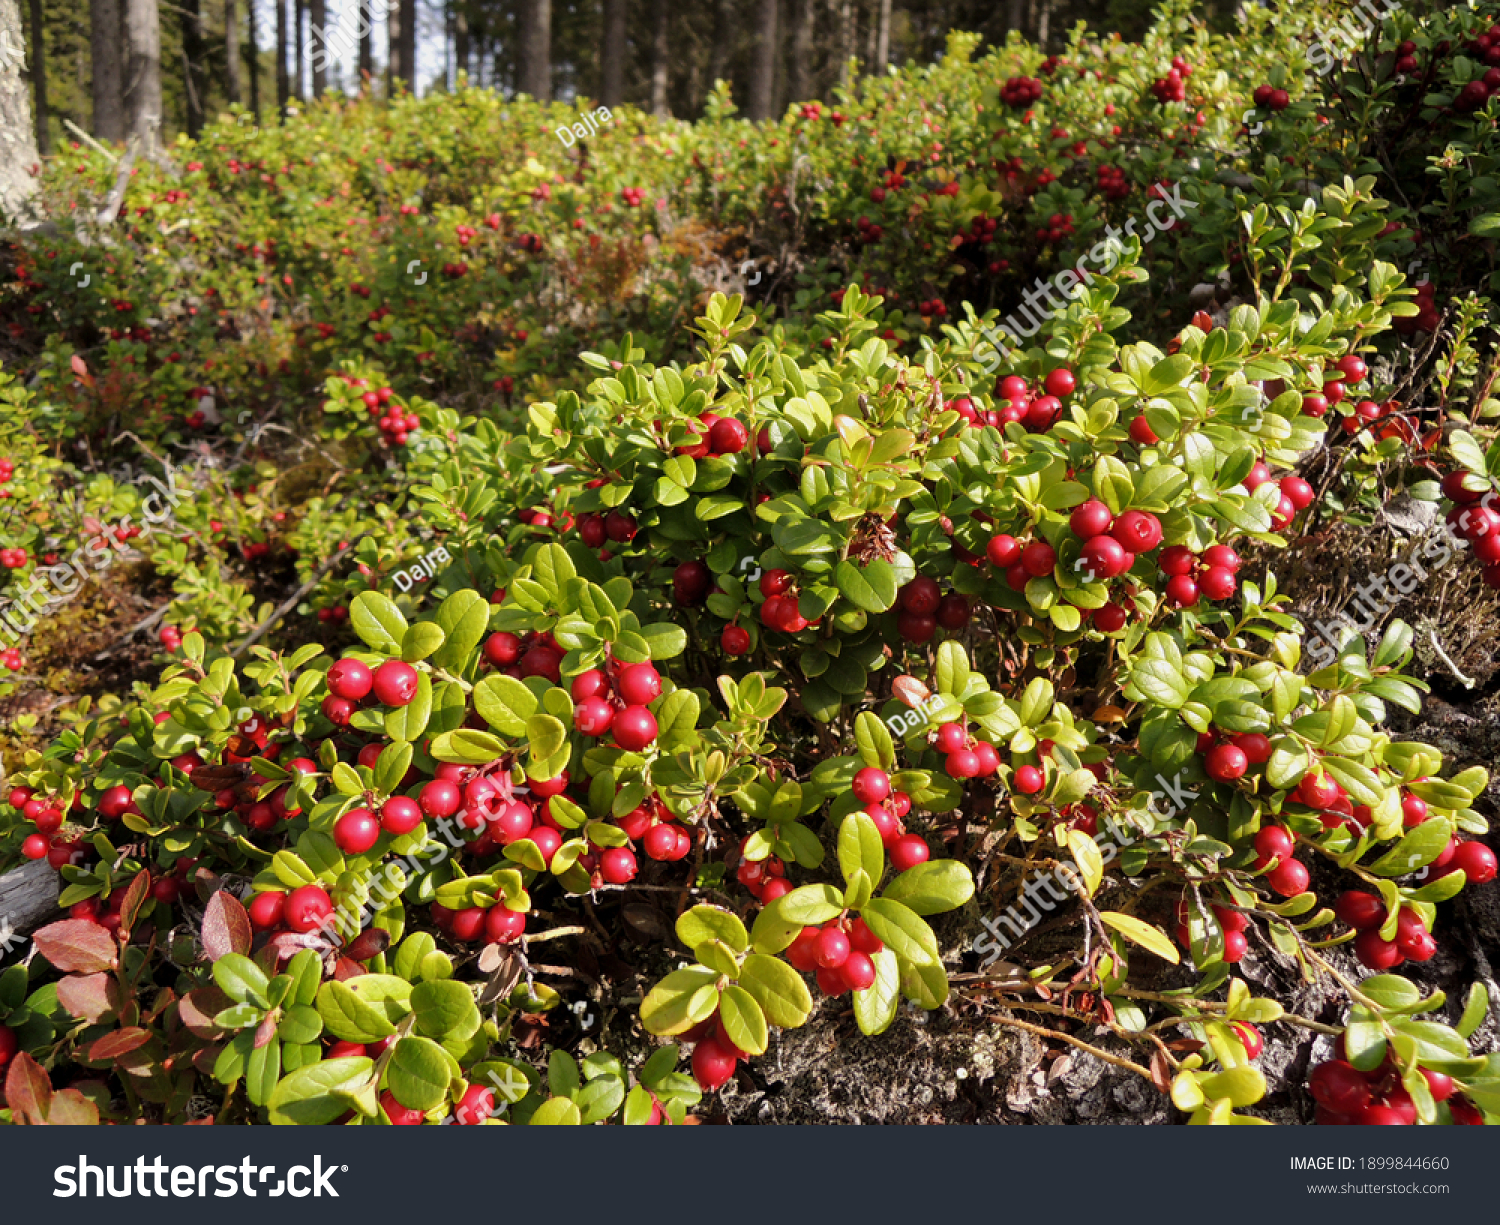 Wild lingonberries (Vaccinium vitis-idaea) growing up in the forest. Cowberry is a short evergreen shrub          #1899844660